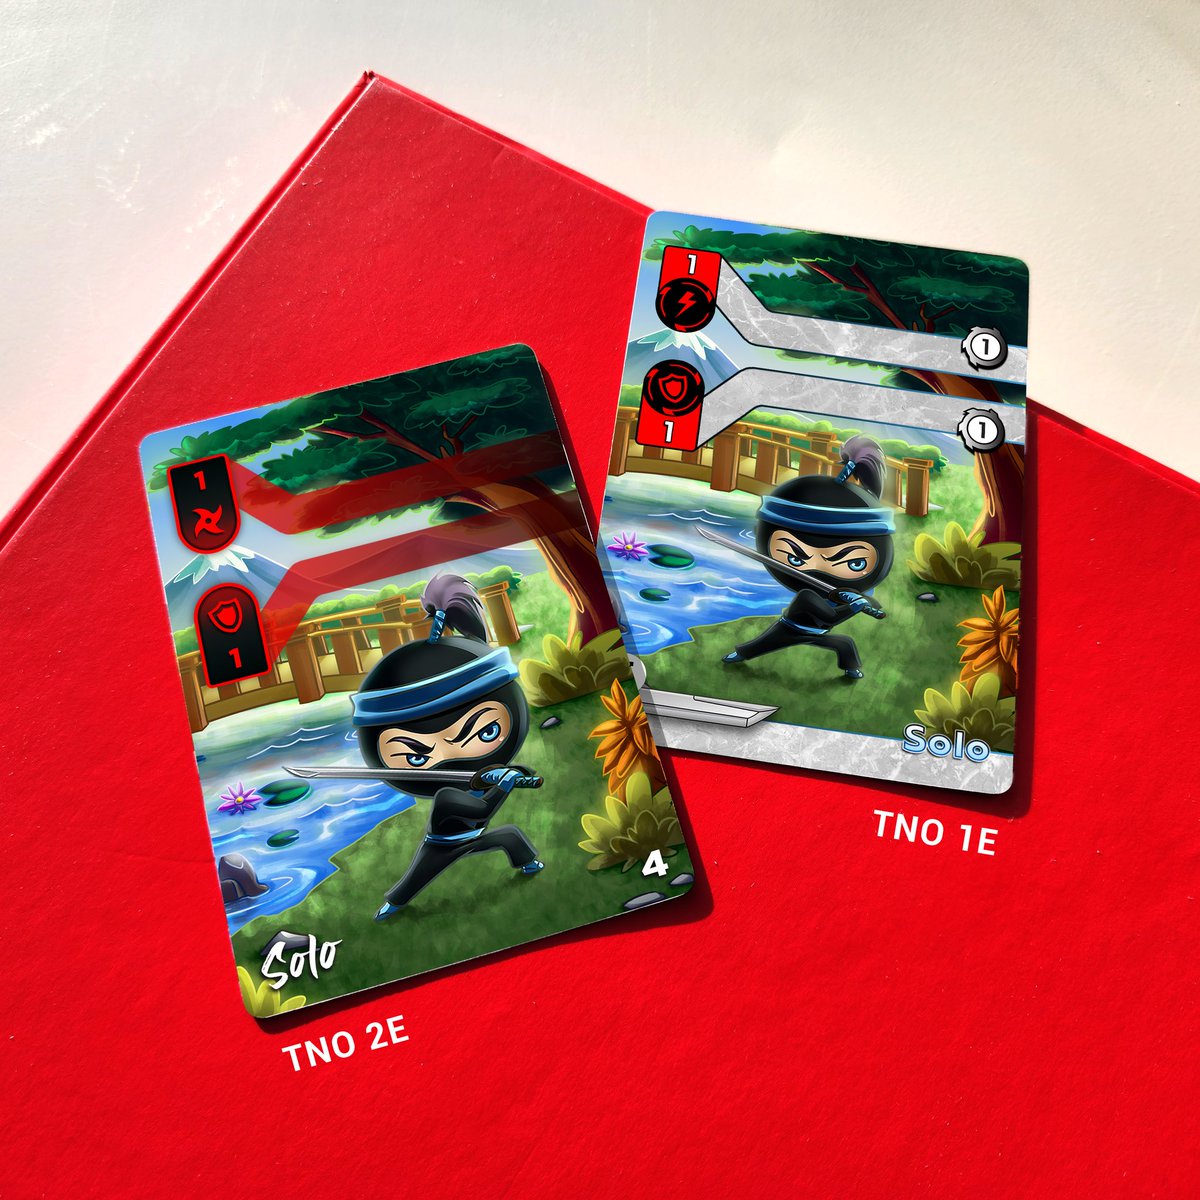 Made some layout changes for the second edition of Tiny Ninjas: Original. Which version do you like better? #boardgames #tabletopgames #boardgamegeek #gamenight #graphicdesign #gamedesign